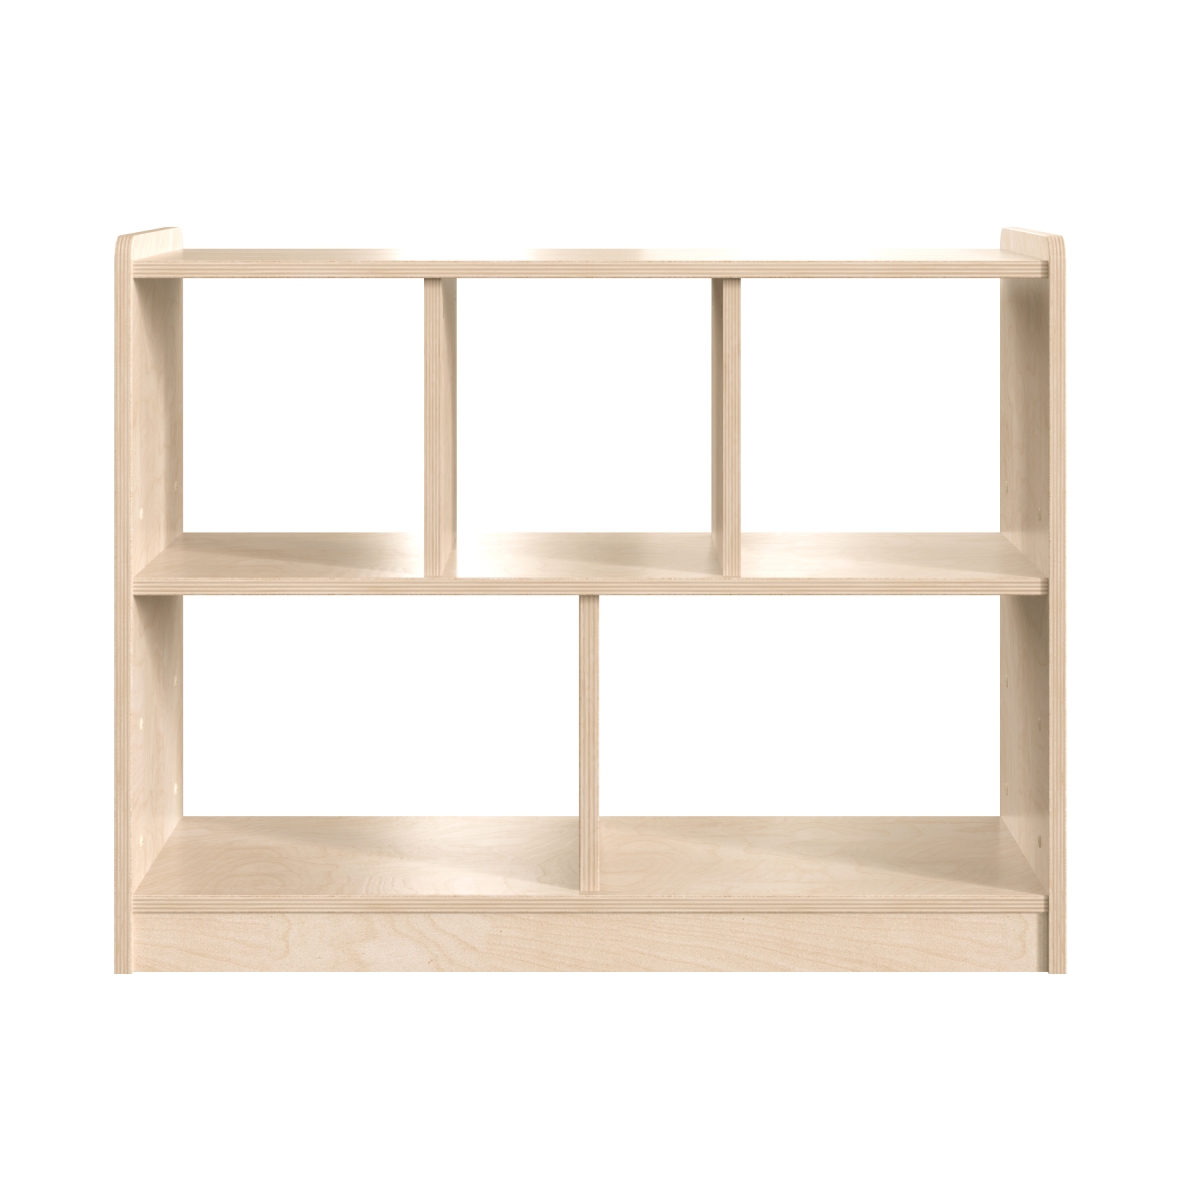 Picture of Flash Furniture MK-KE23940-GG Bright Beginnings Commercial Grade 5 Section Modular Wooden Classroom Open Storage Unit, Safe, Kid Friendly Design, Natural